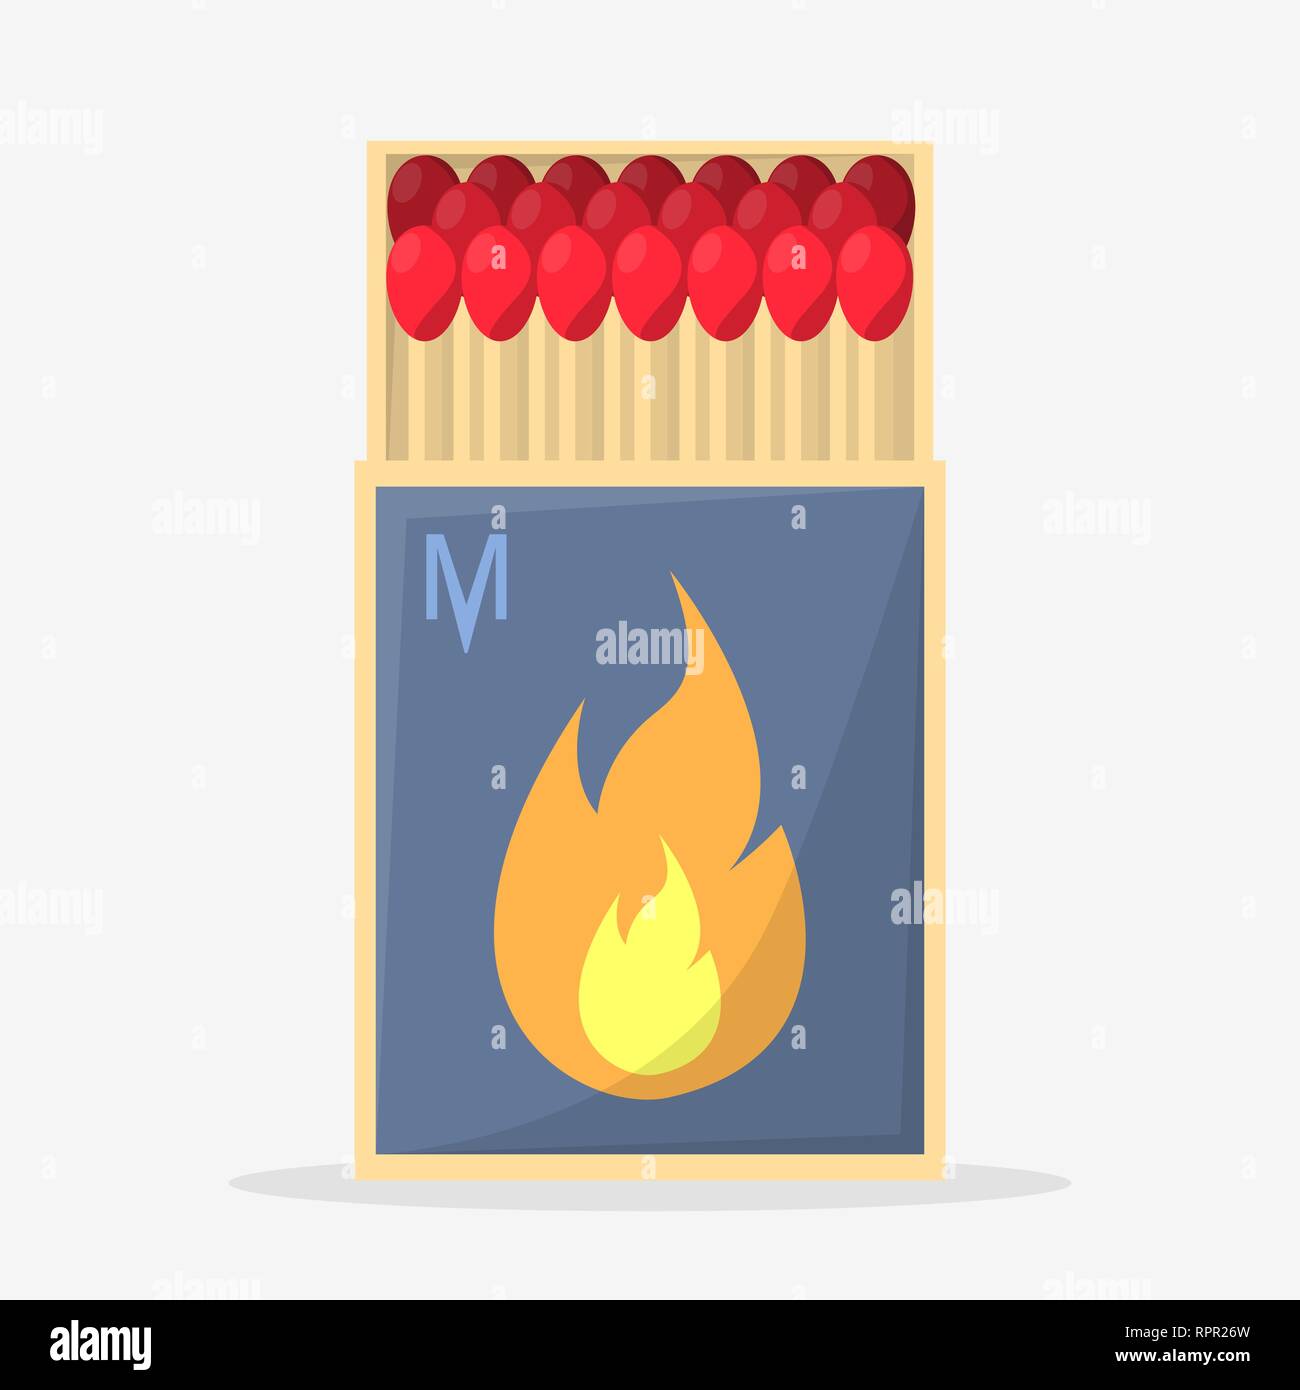 Collection of matches. Burning match with fire, opened matchbox. Flat design style. Stock Vector